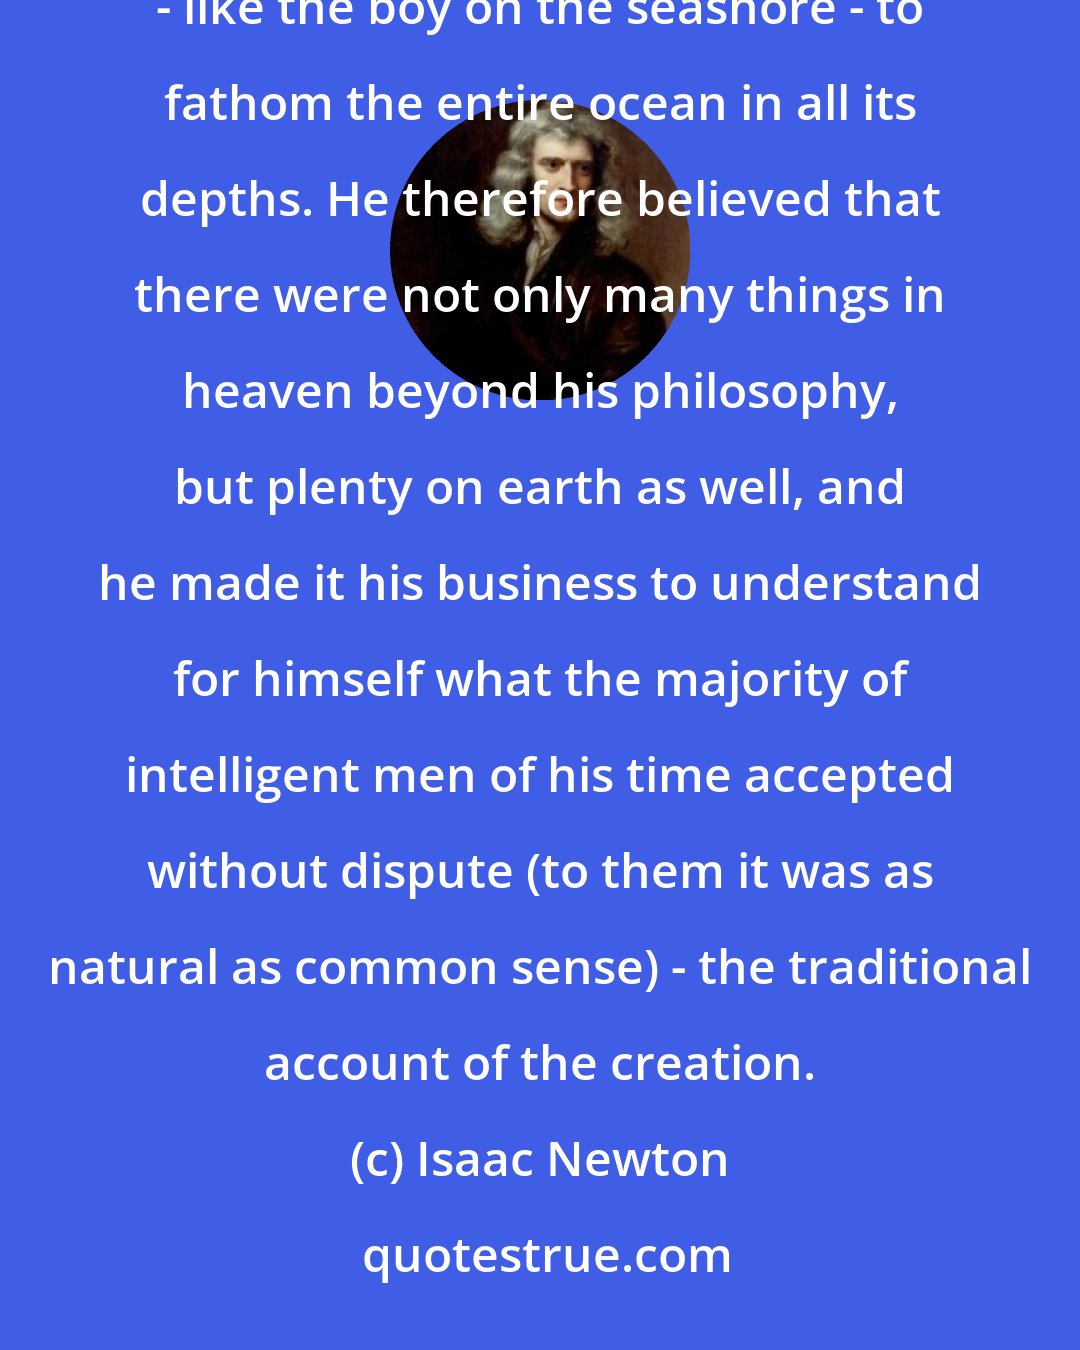 Isaac Newton: . . . Newton was an unquestioning believer in an all-wise creator of the universe, and in his own inability - like the boy on the seashore - to fathom the entire ocean in all its depths. He therefore believed that there were not only many things in heaven beyond his philosophy, but plenty on earth as well, and he made it his business to understand for himself what the majority of intelligent men of his time accepted without dispute (to them it was as natural as common sense) - the traditional account of the creation.